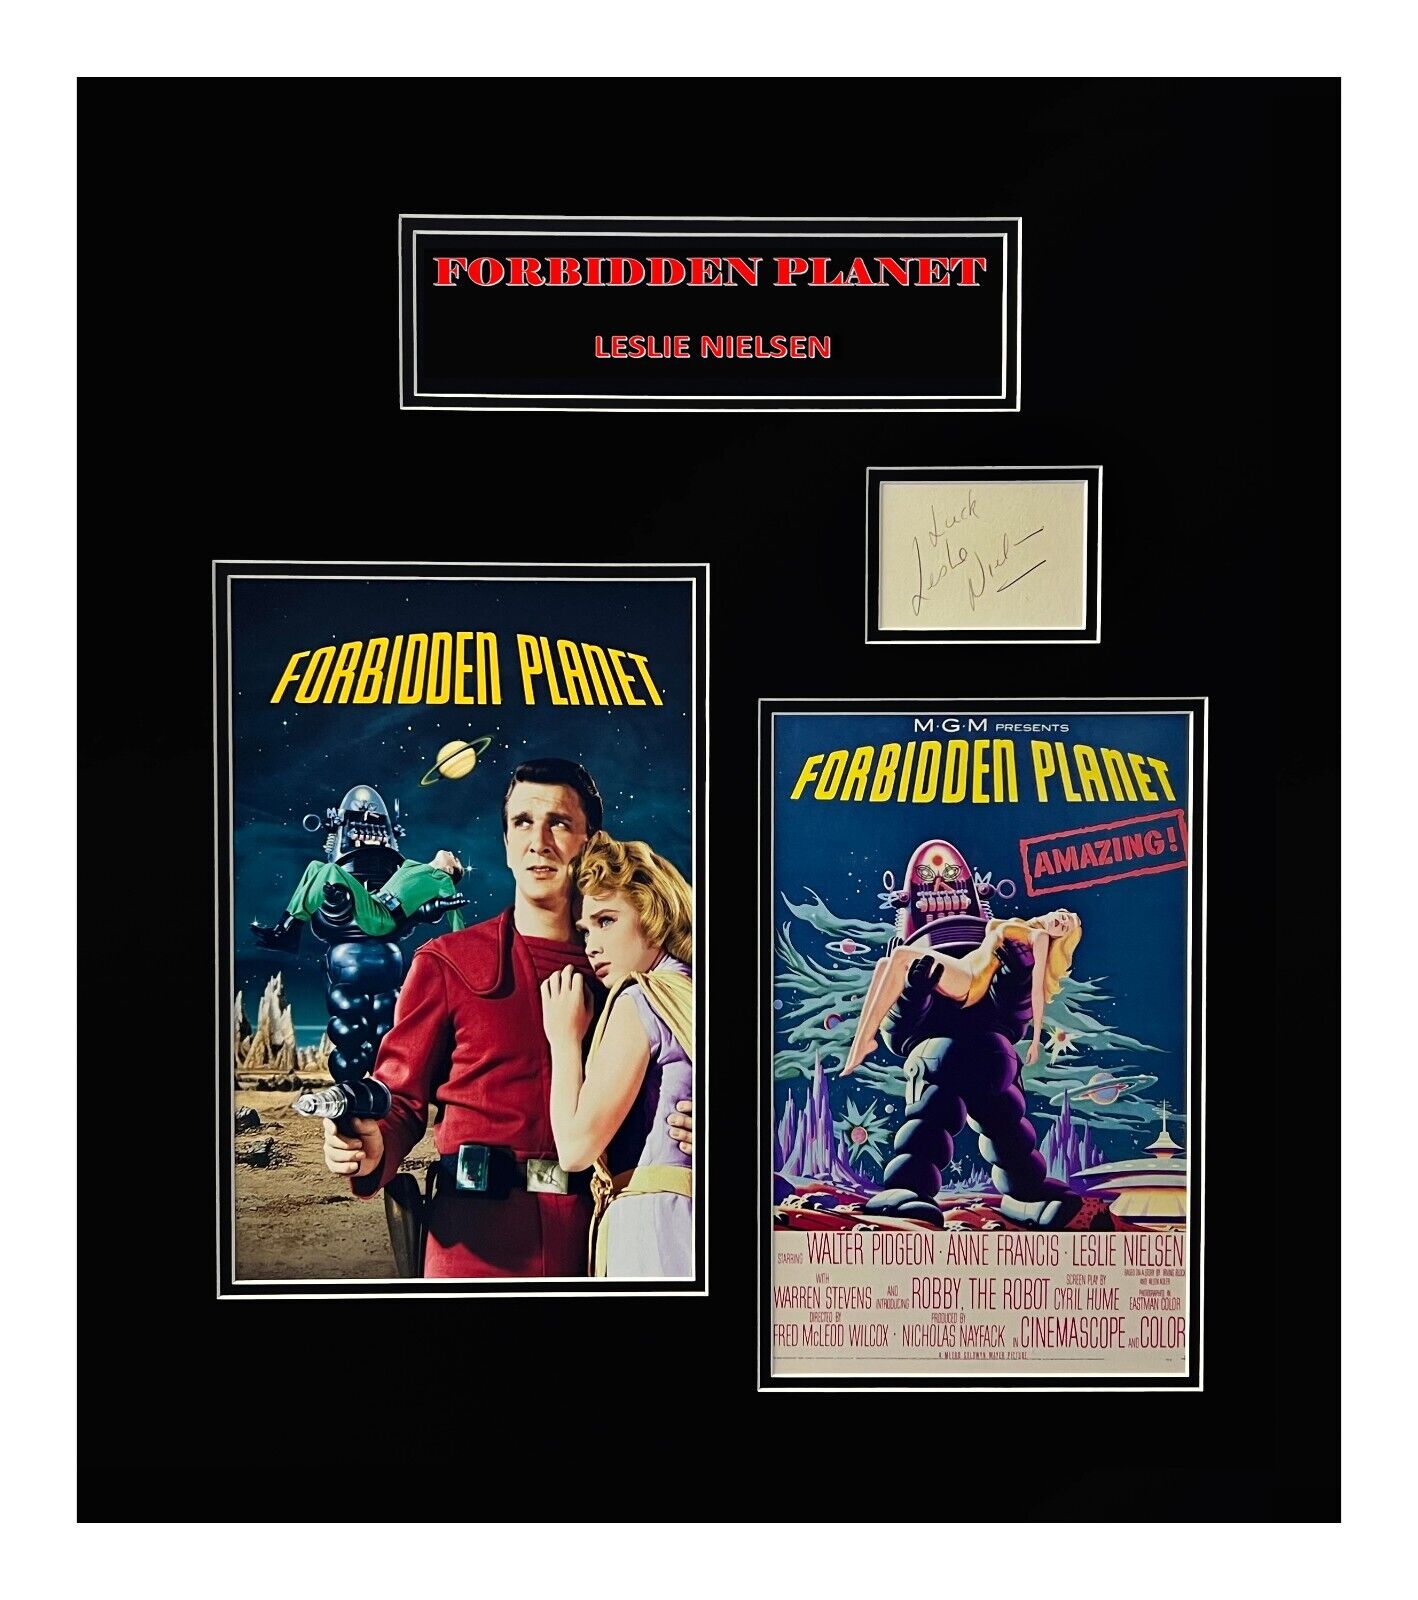 Leslie Nielsen Autograph-Forbidden Planet comes Museum Framed Ready to Display